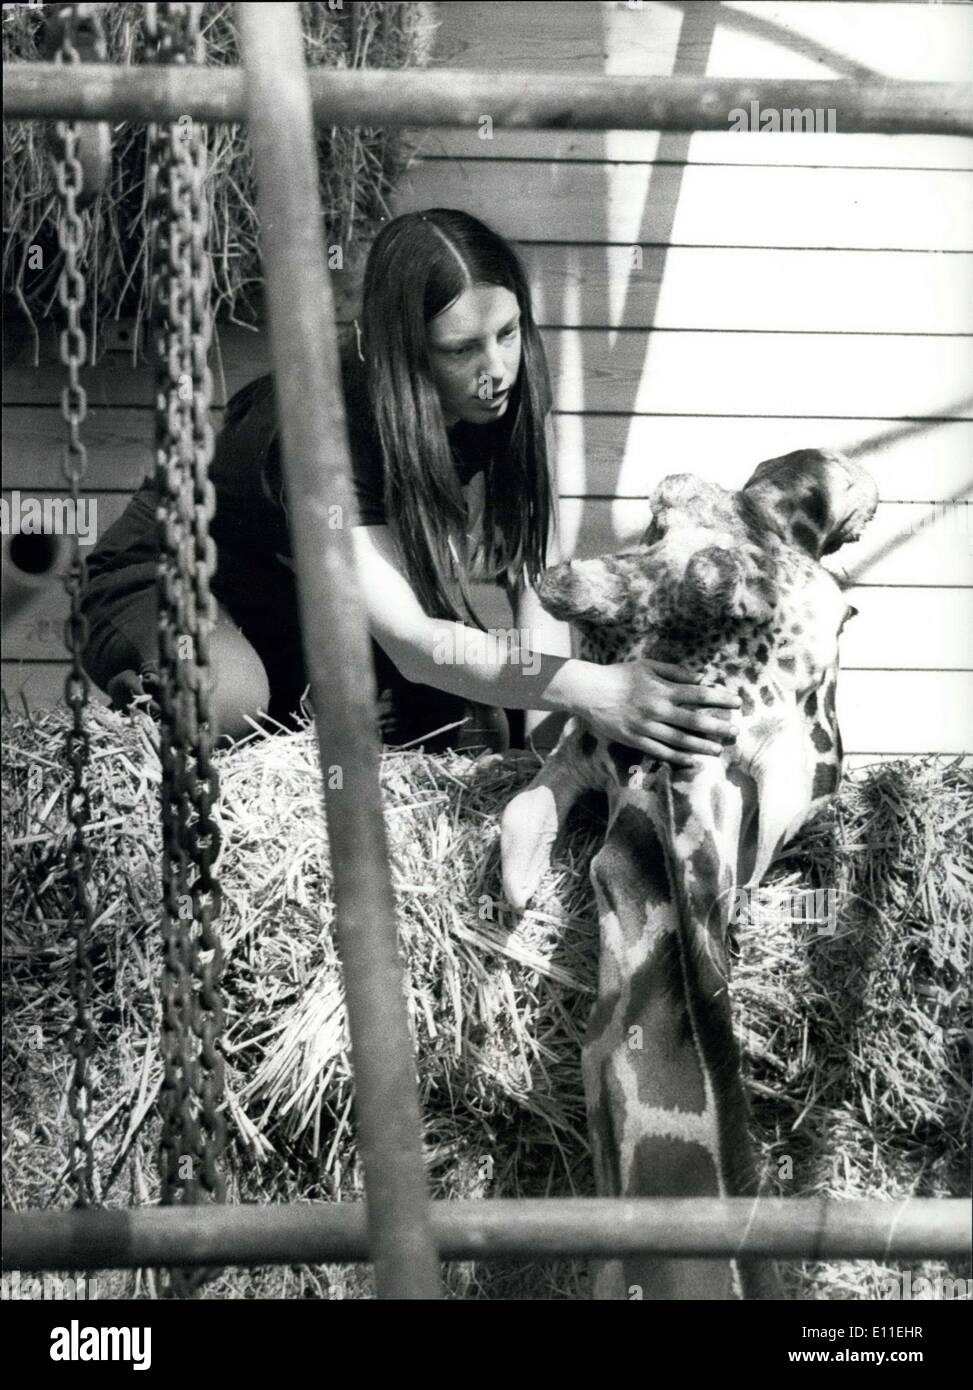 Sep. 20, 1977 - Victor the Giraffe dies for Love: Victor, the amorous Giraffe from Marwell Zoological park near Winchester, fell in love last Thursday and couldn't get up again. He had spent the night with three lady giraffes and collapsed into the splits. Firemen were called in to try to get him back on his feet but all attempts failed. He has been dosed with drugs to keep his strength up and yesterday a frame was built around him for a desperate attempt to hoist him up Stock Photo